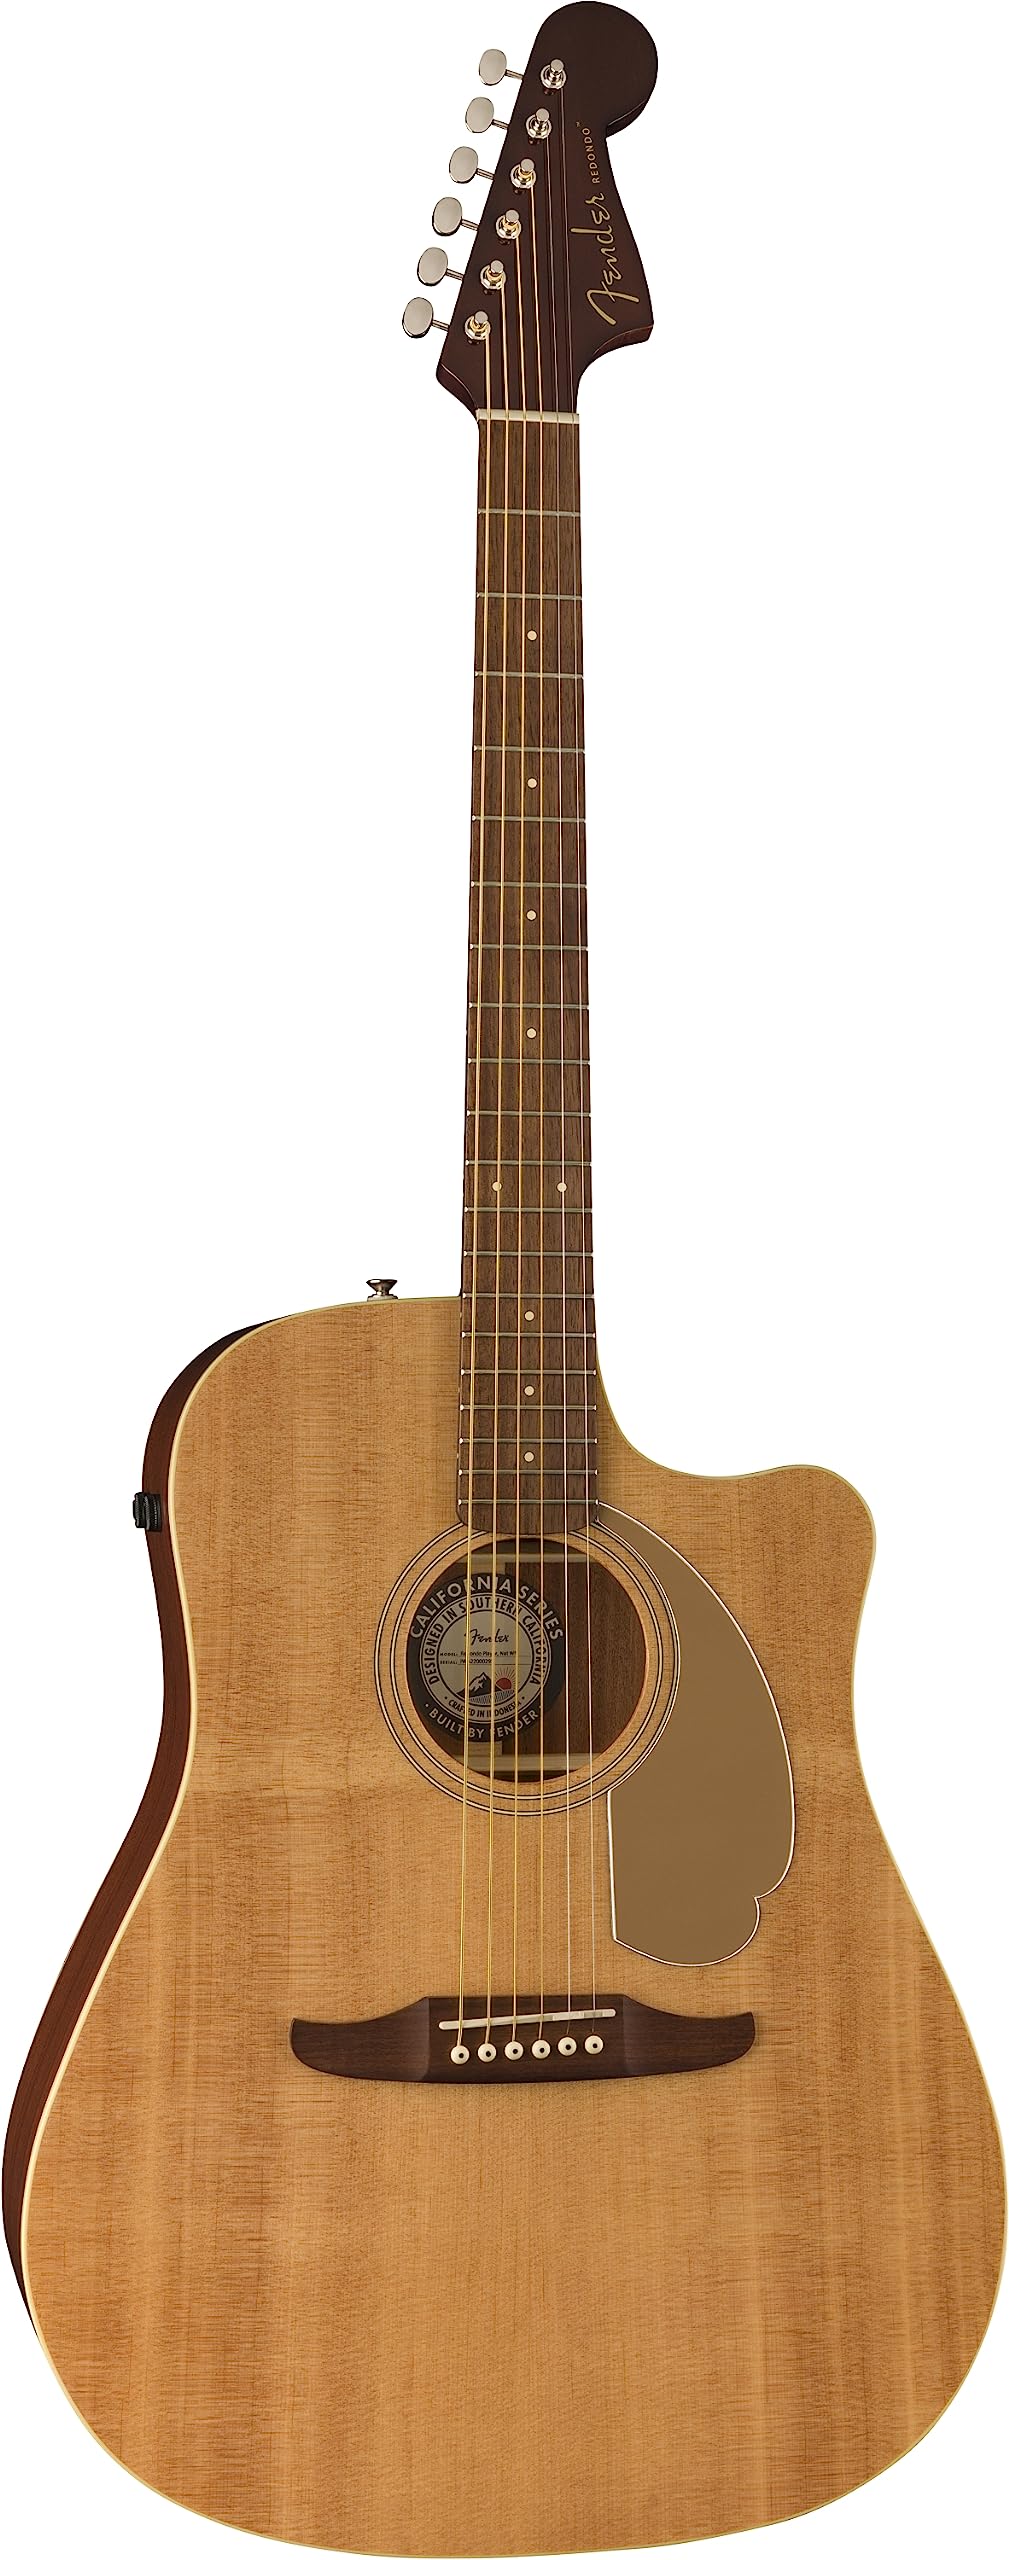 Fender 6 String Acoustic Guitar, Right-Hand, Natural ~ $252 @ Amazon.com